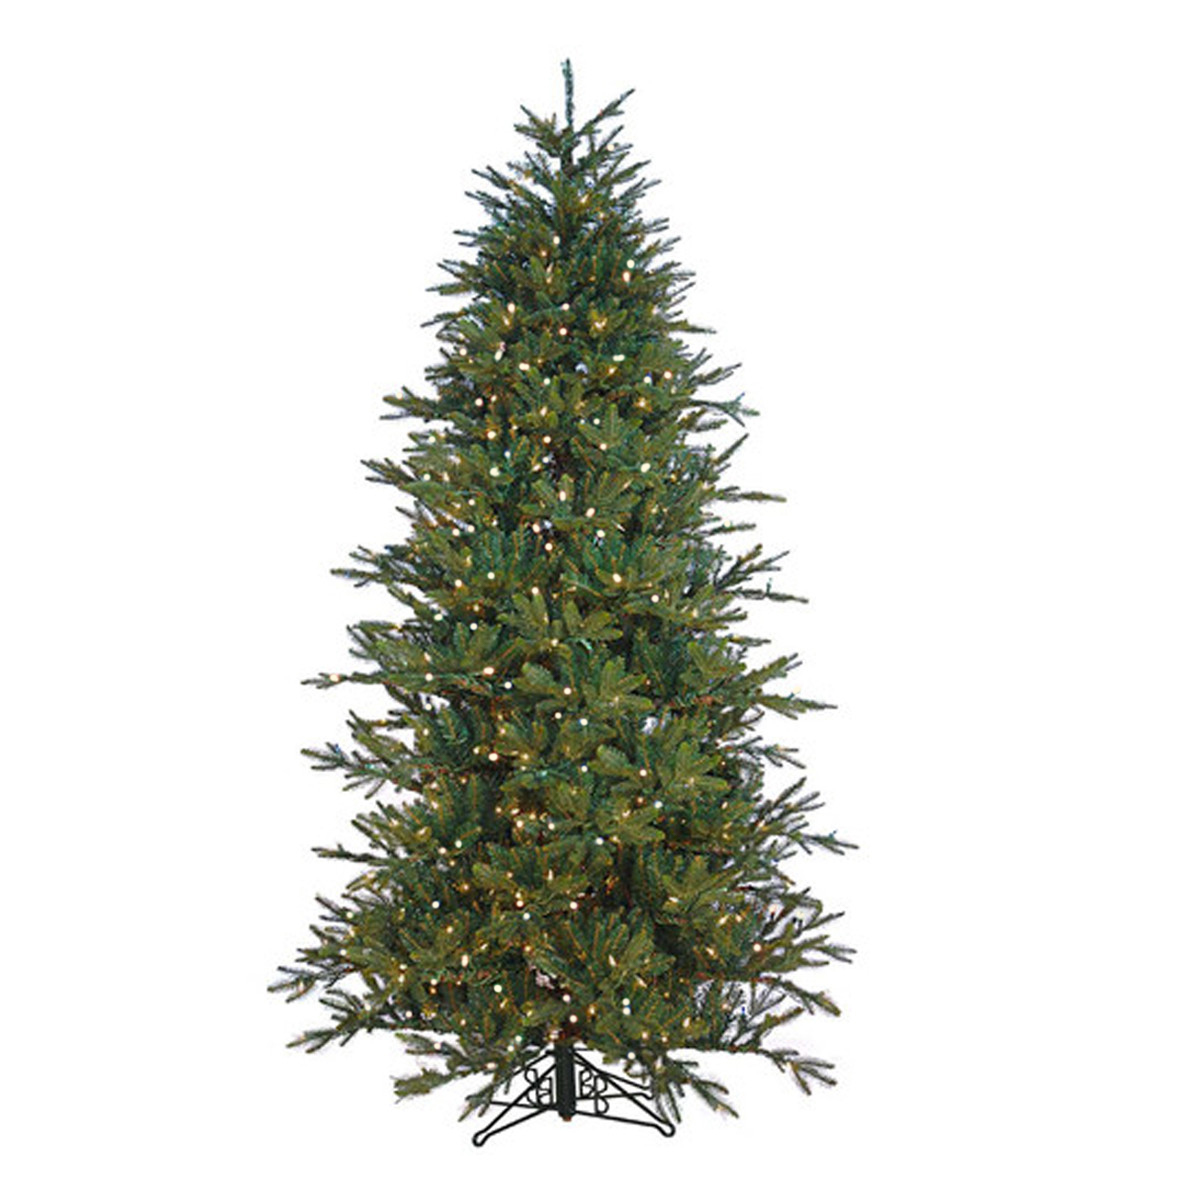 Alaskan Deluxe Tree - Slim-Style - Warm White LED Glow Lights - One-Plug Power Supply - 9ft Tall